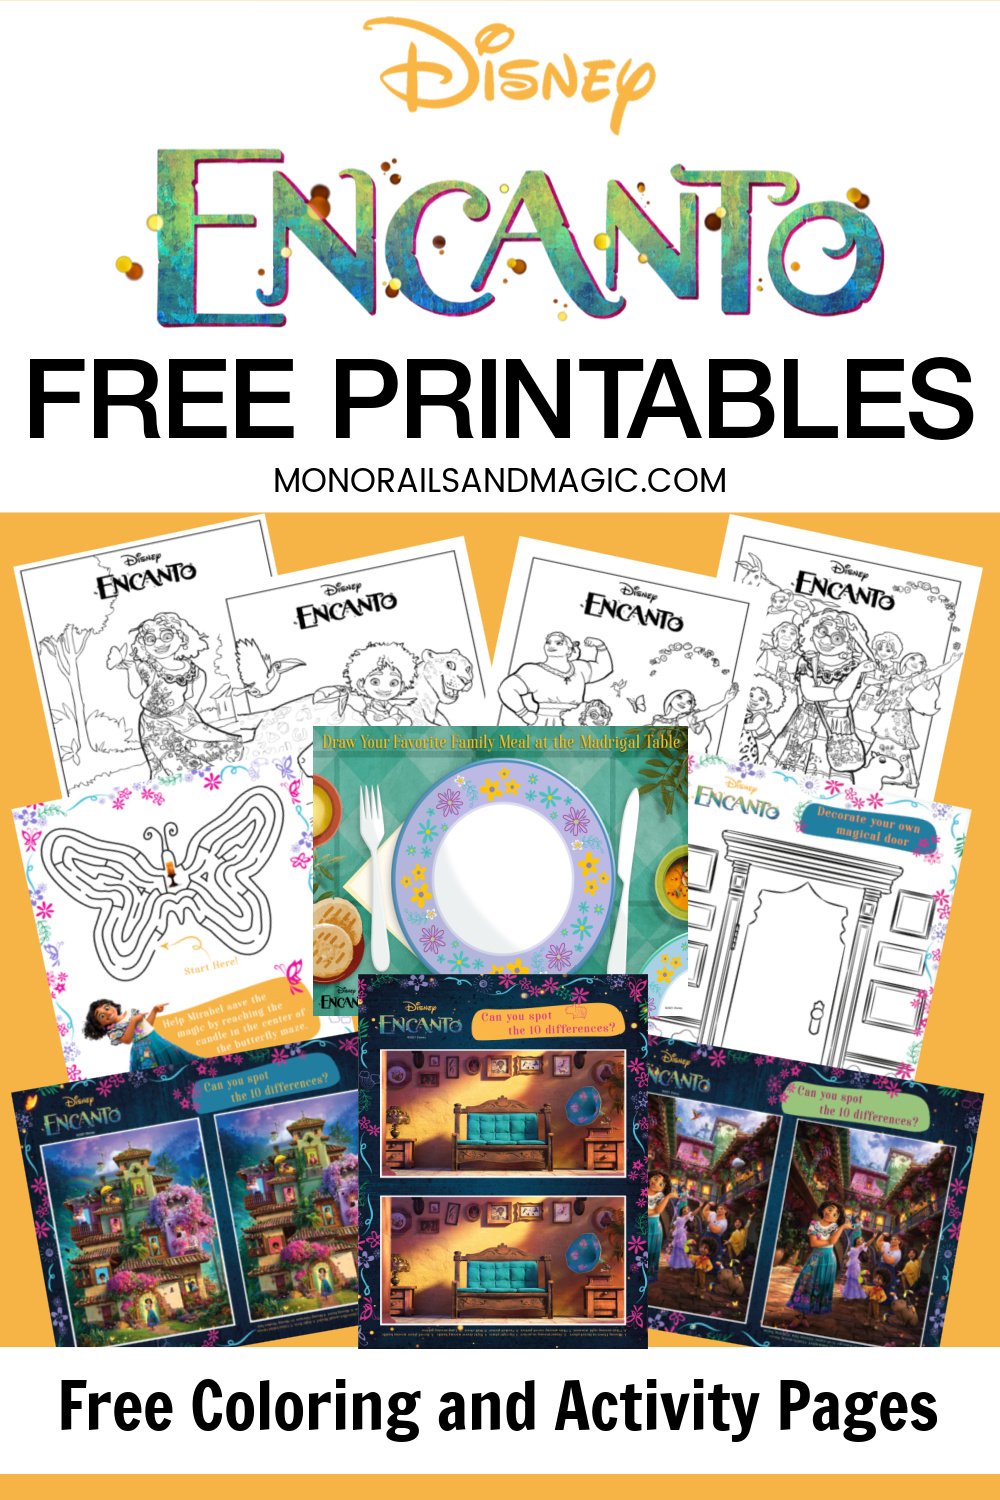 Free Printable Encanto Coloring and Activity Pages   Monorails and ...